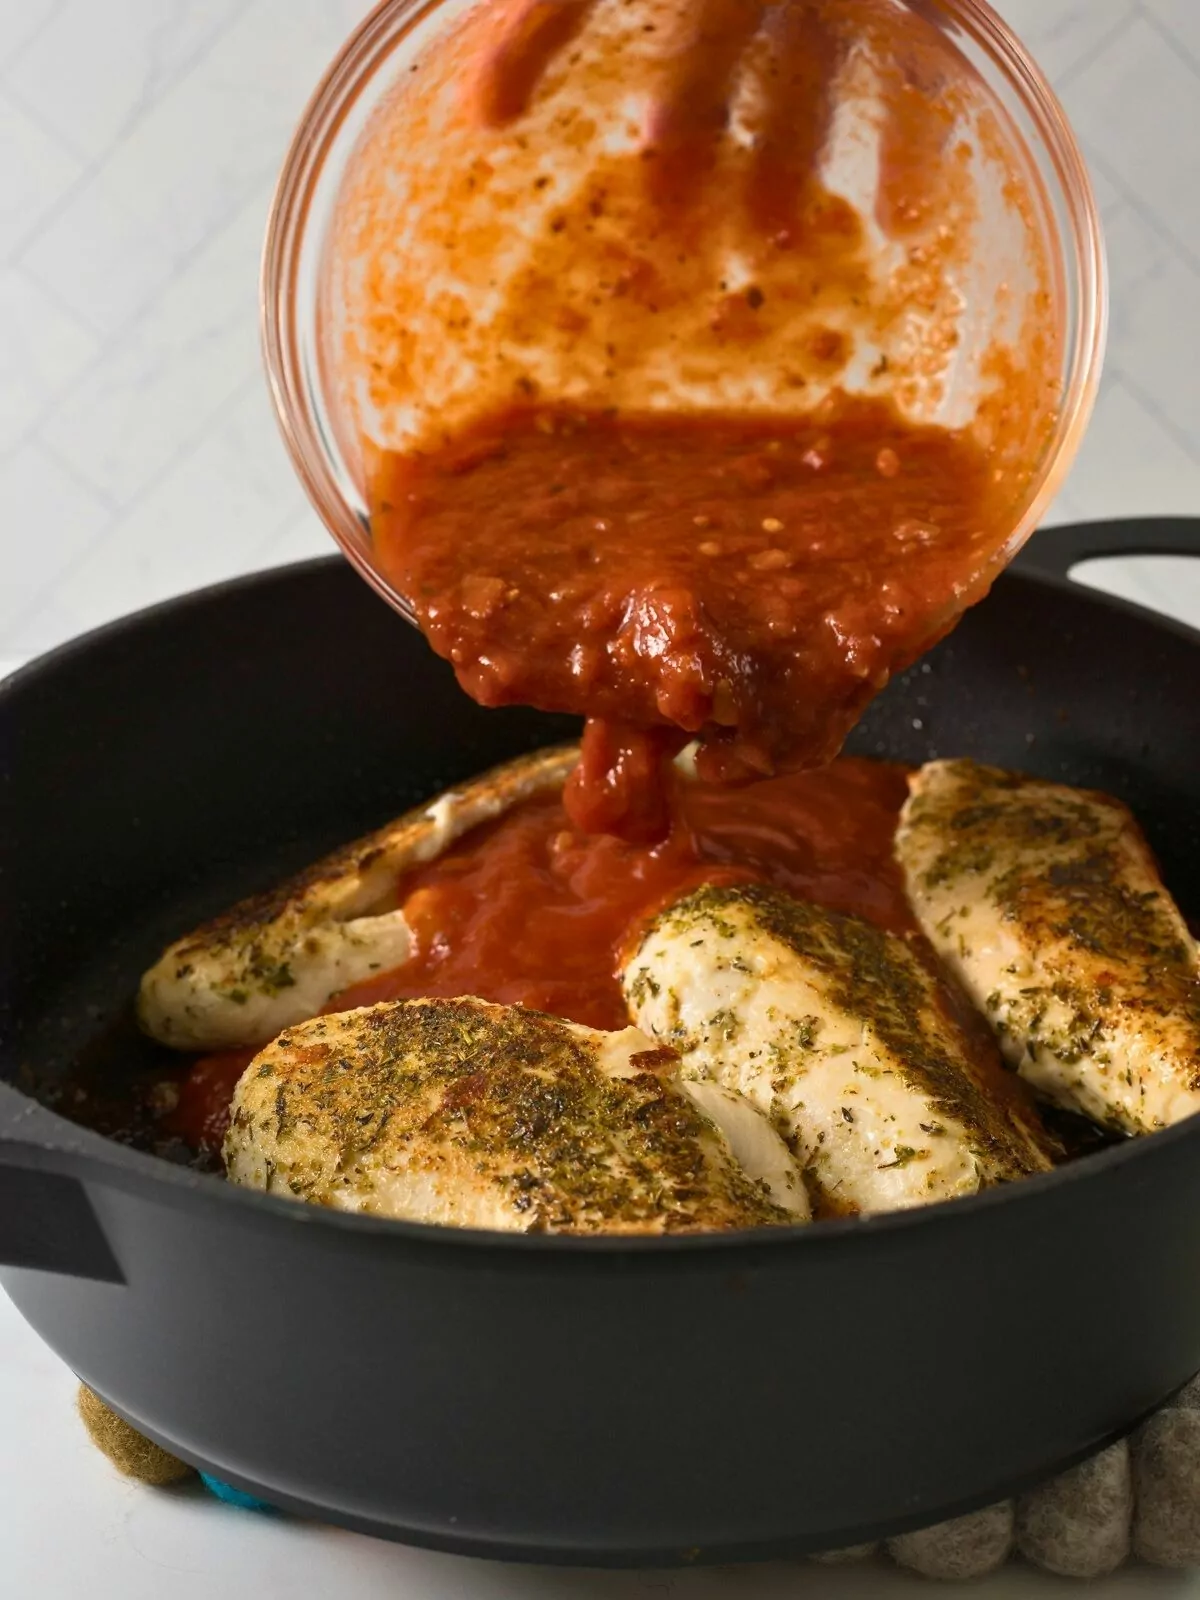 Add tomato sauce on top of browned chicken breasts in cast iron skillet.